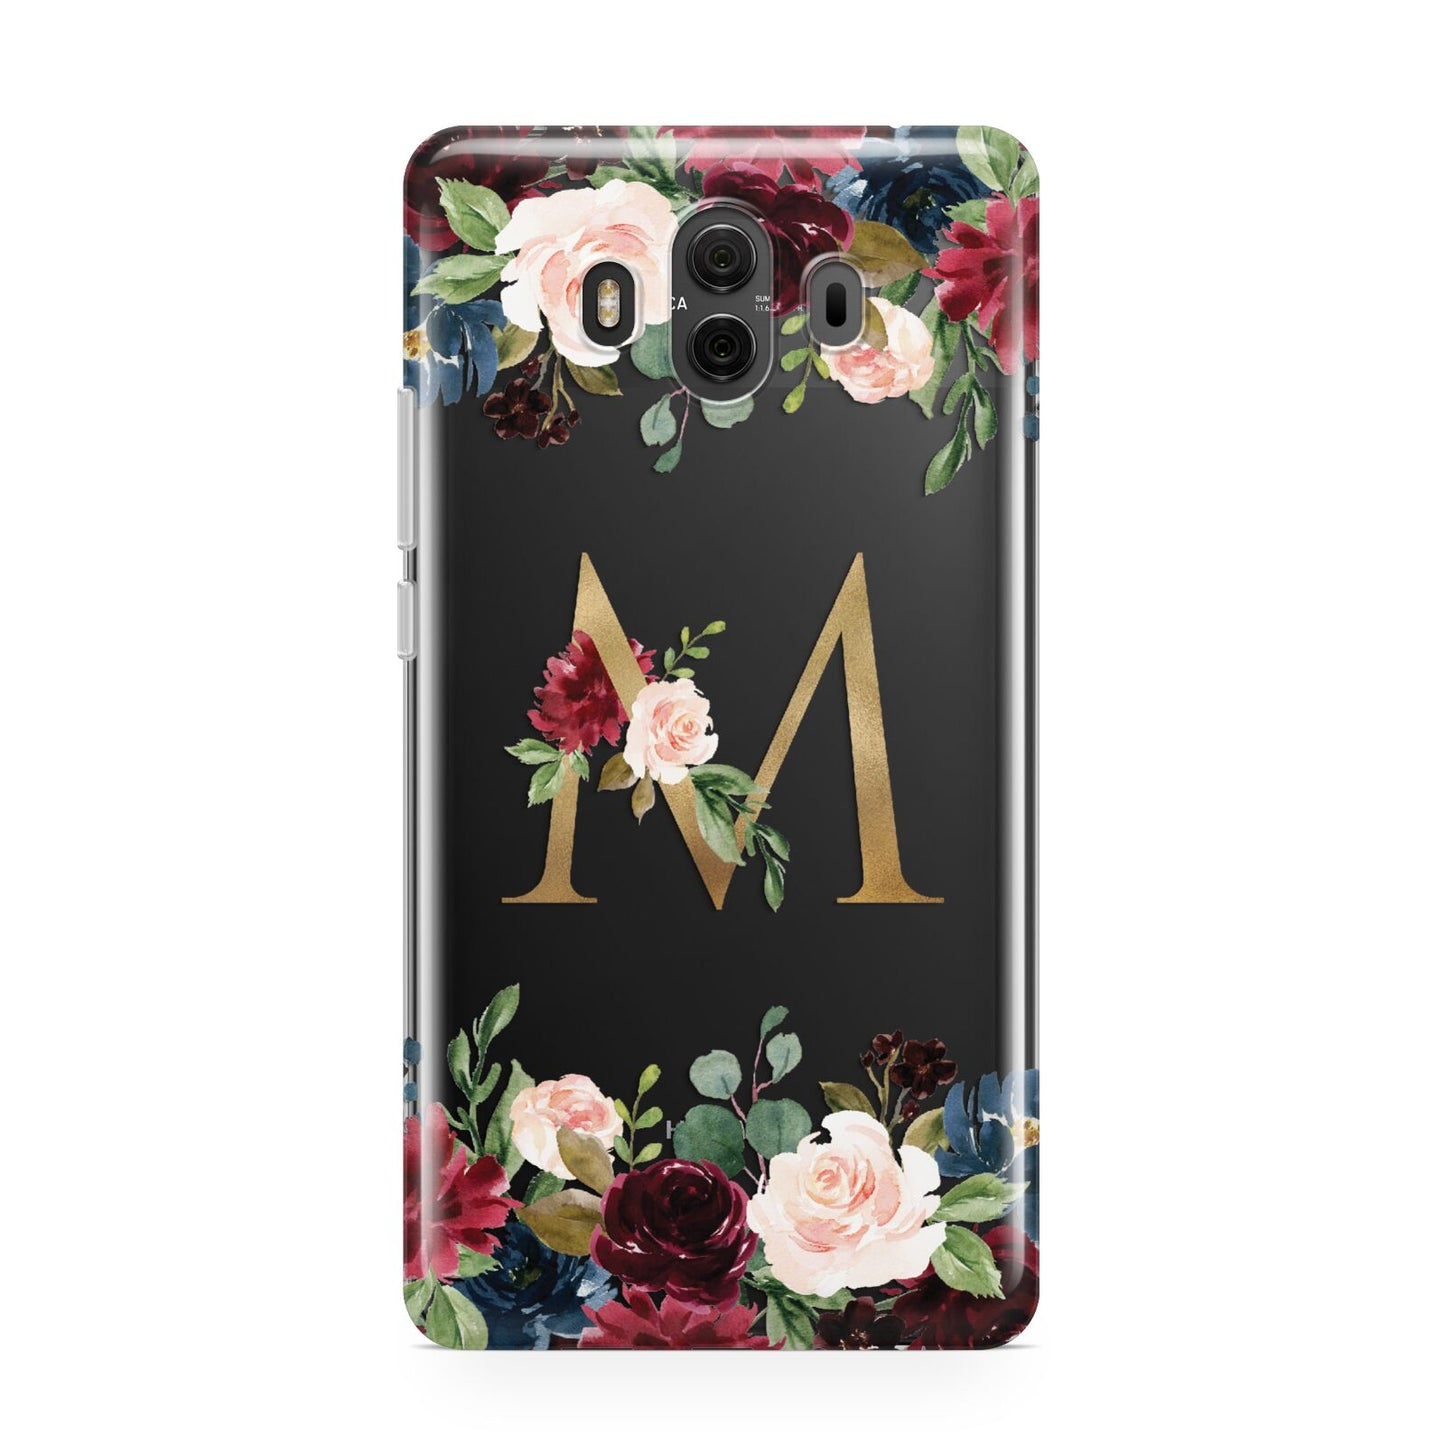 Personalised Clear Monogram Floral Huawei Mate 10 Protective Phone Case